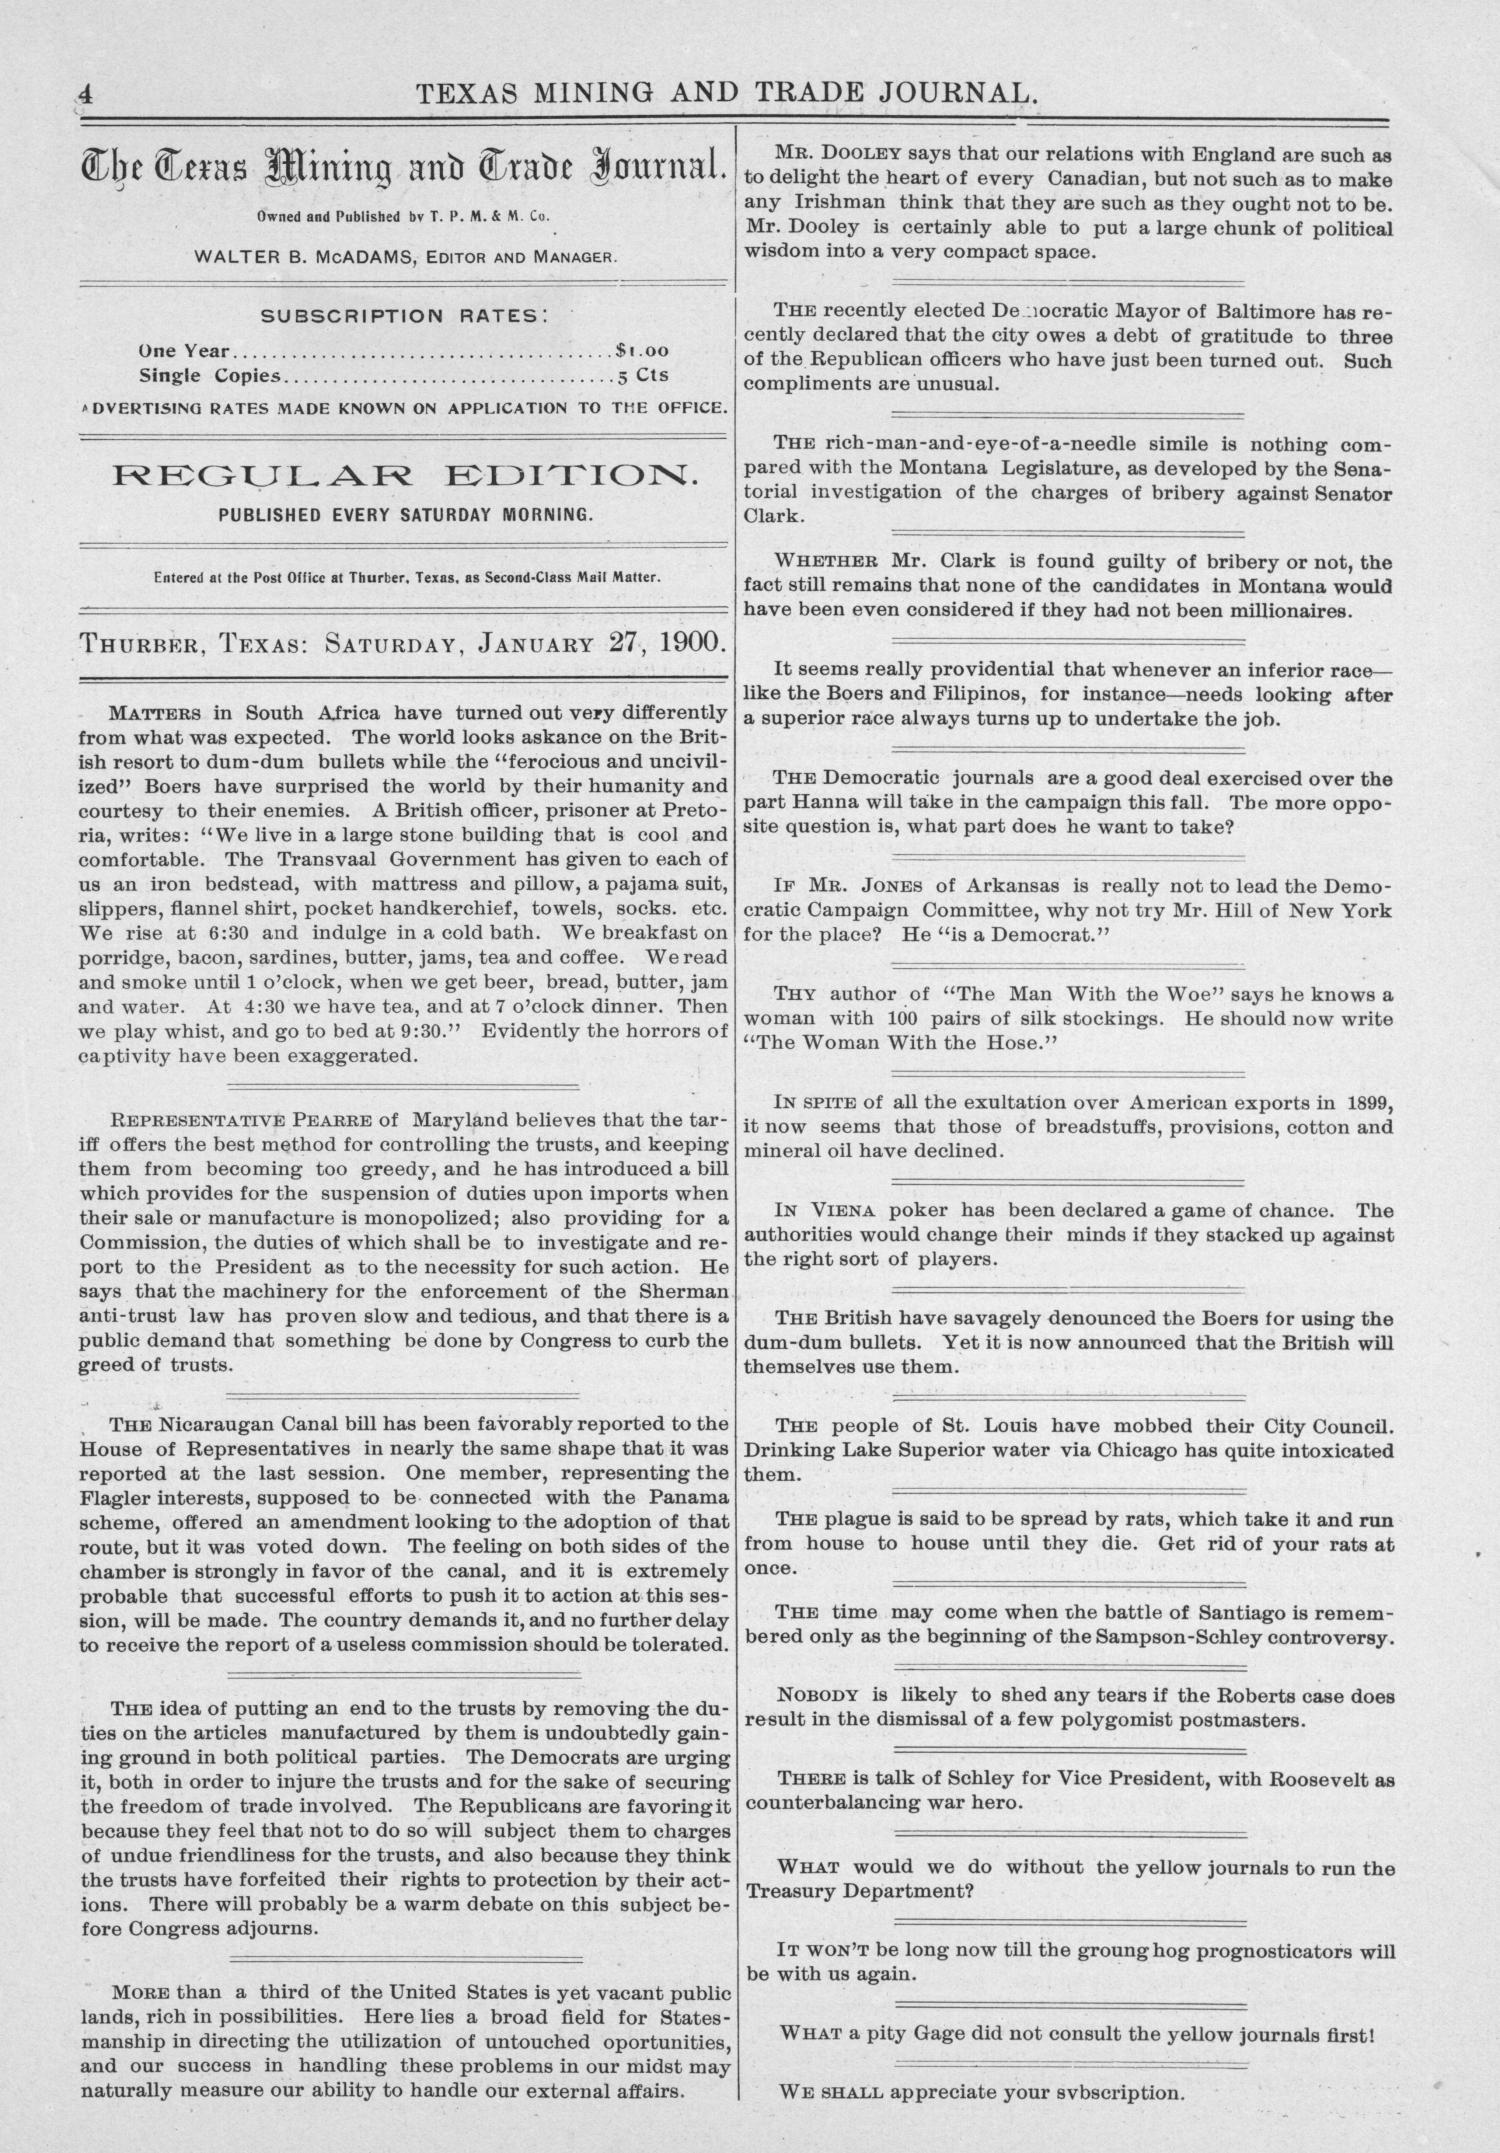 Texas Mining and Trade Journal, Volume 4, Number 28, Saturday, January 27, 1900
                                                
                                                    4
                                                